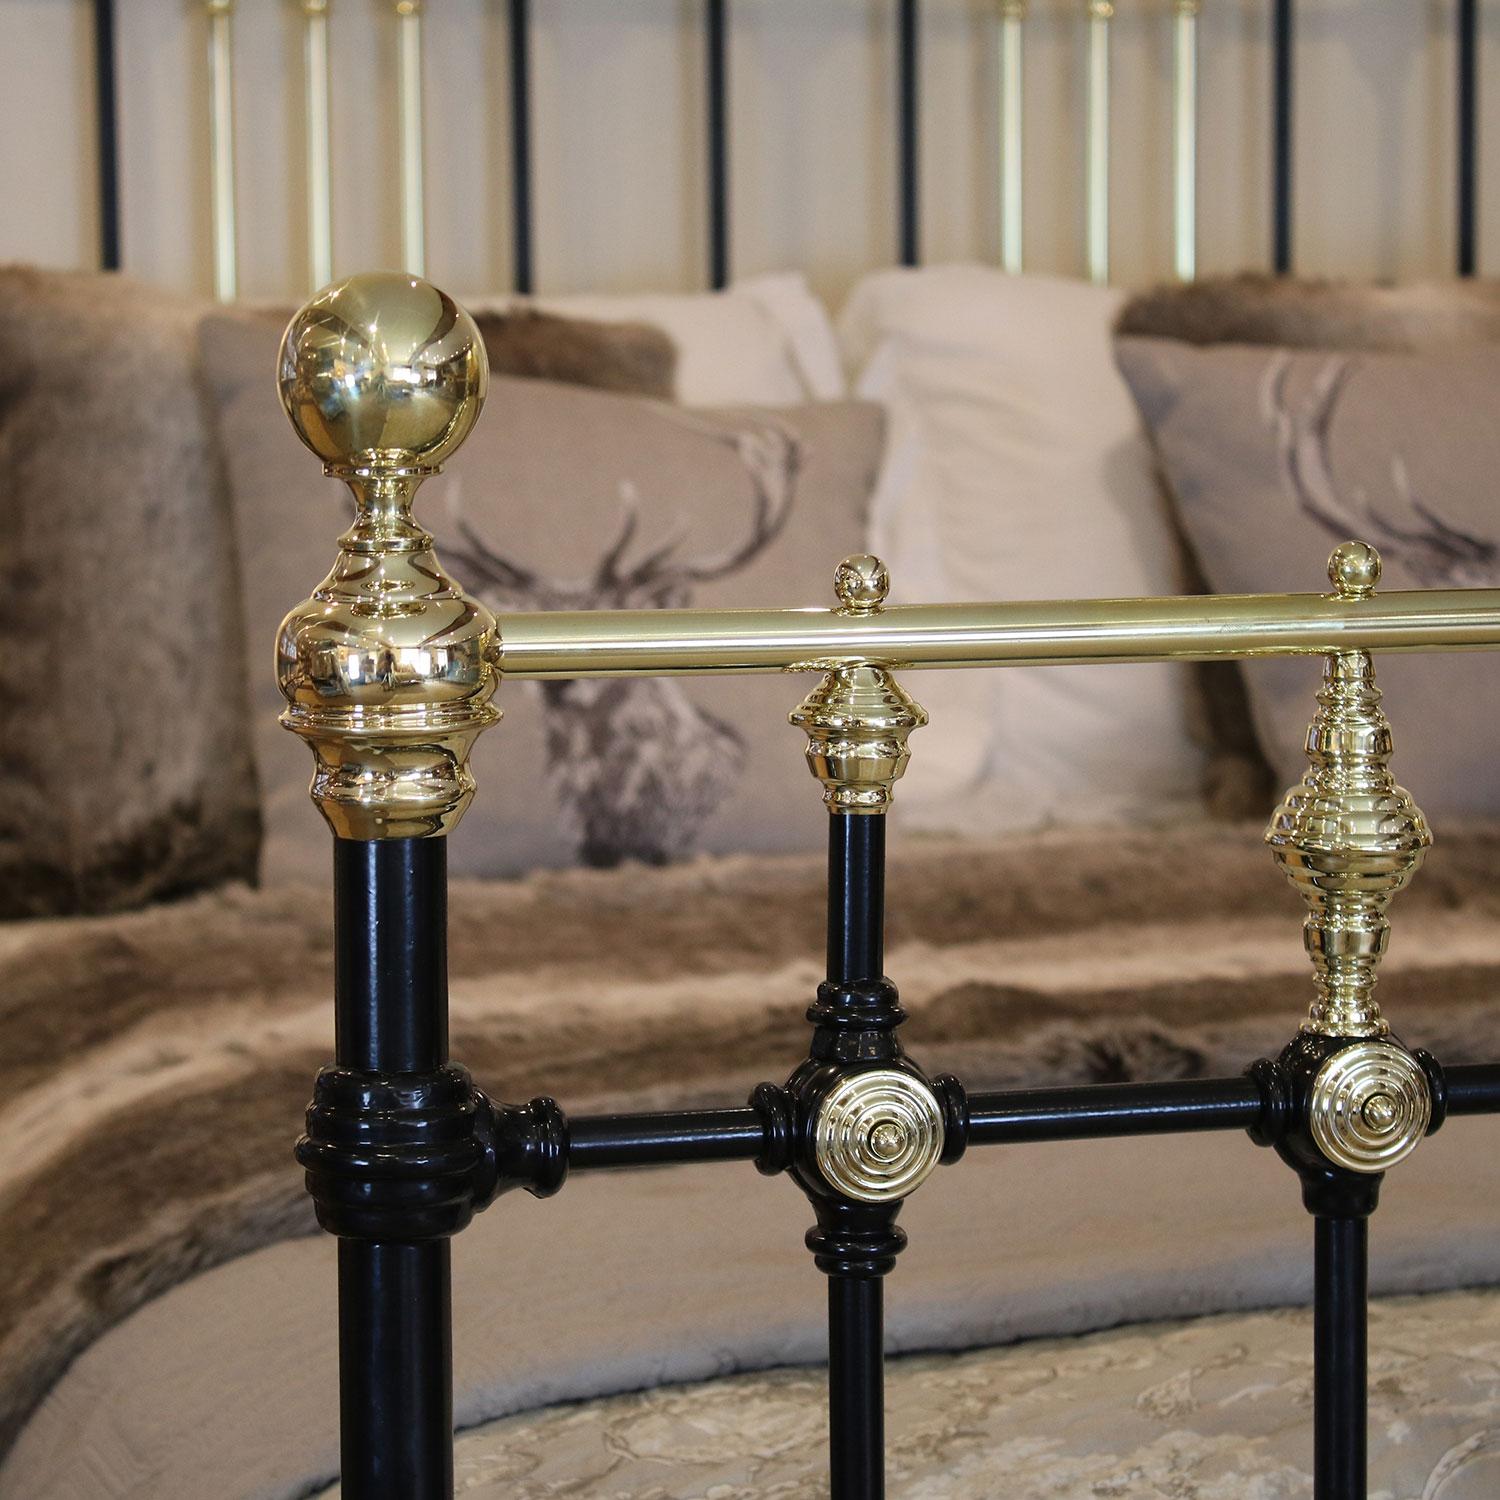 Victorian Decorative Brass and Iron Bed MK151